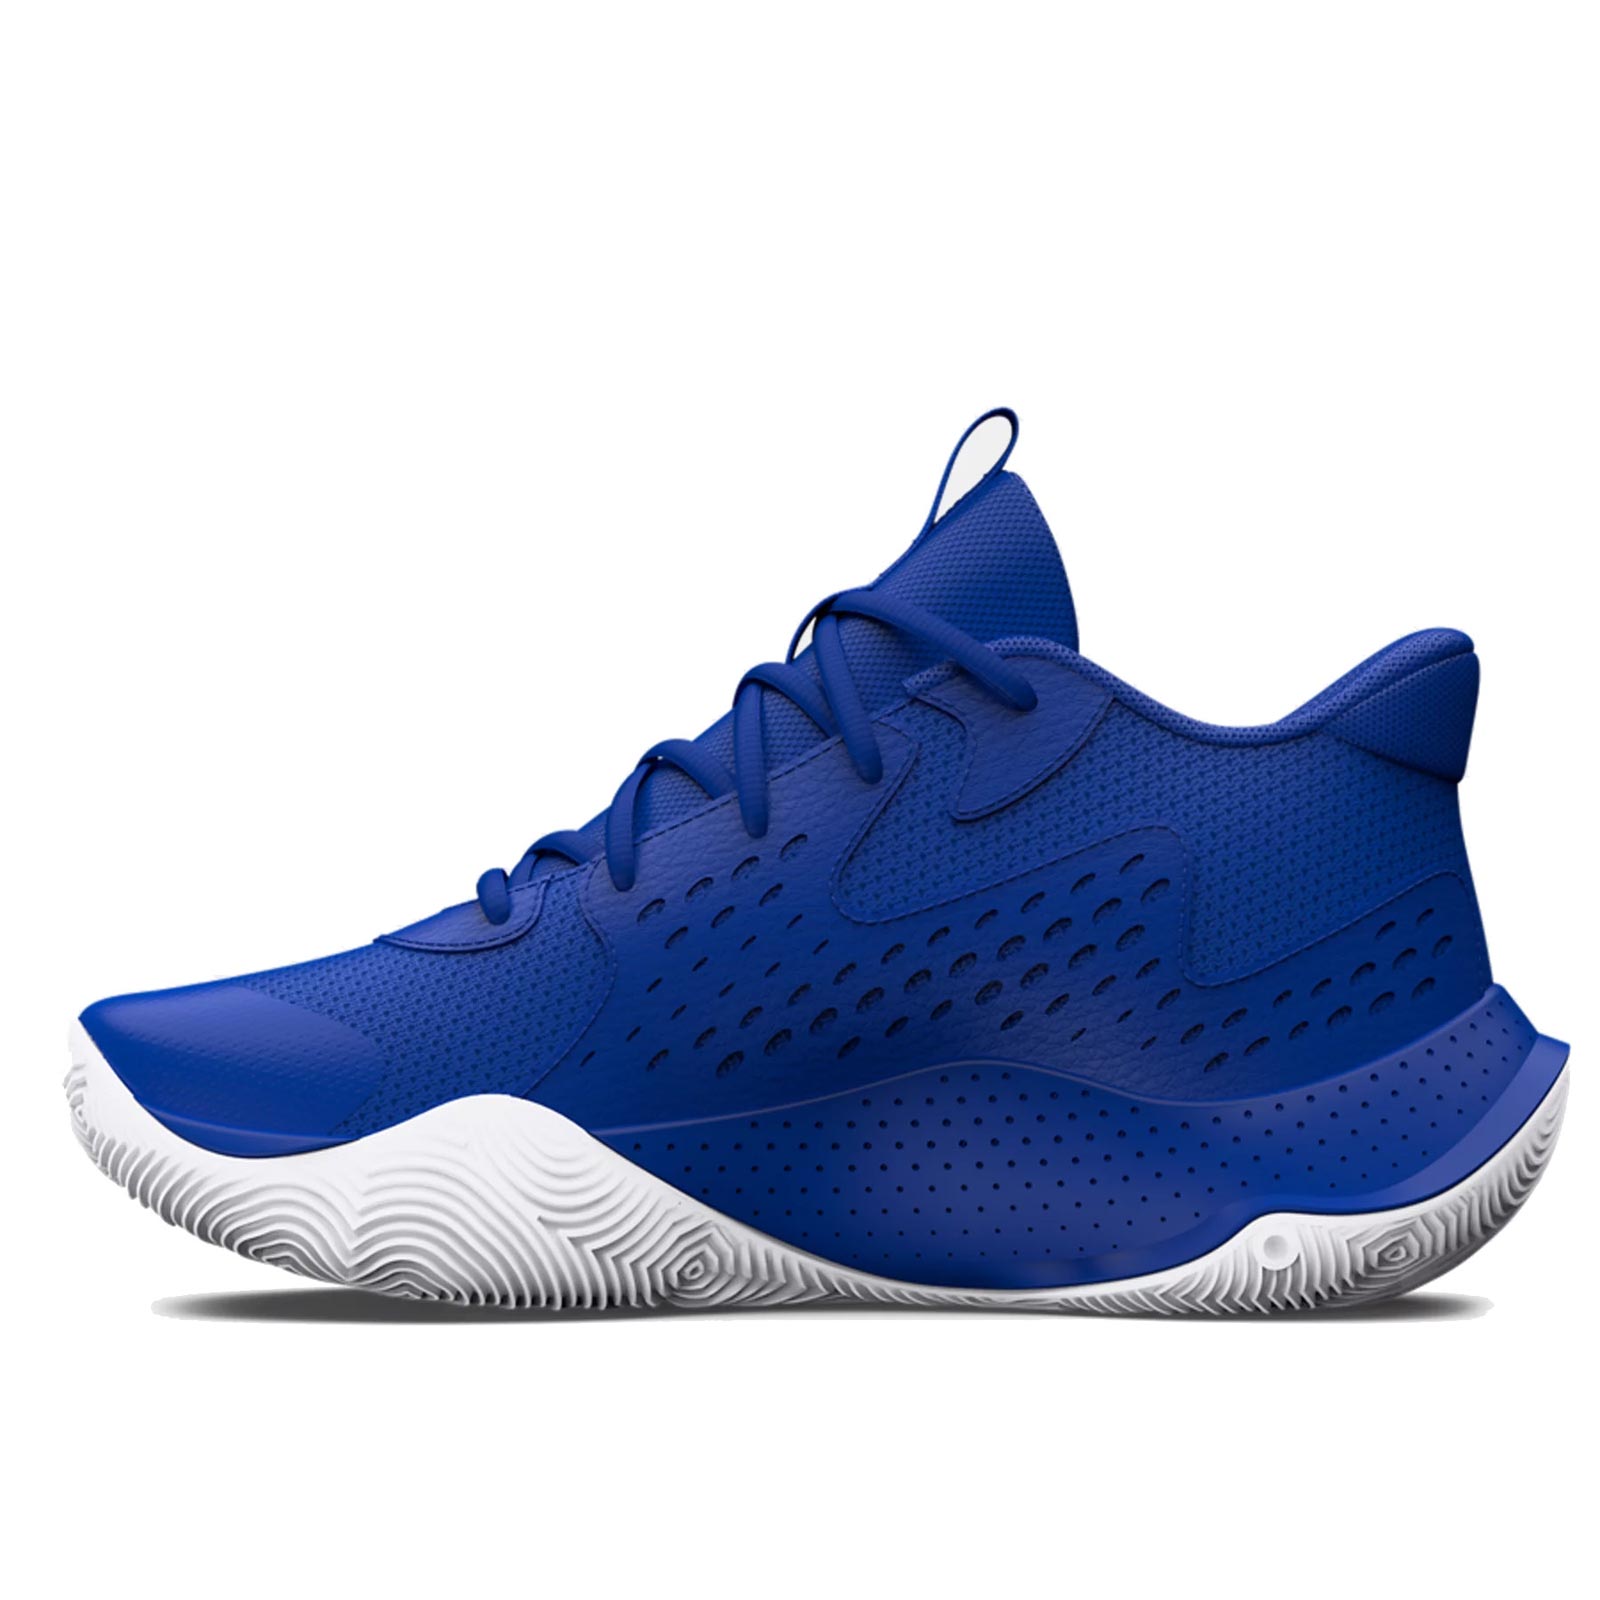 UNDER ARMOUR JET 23 KIDS BASKETBALL SHOES